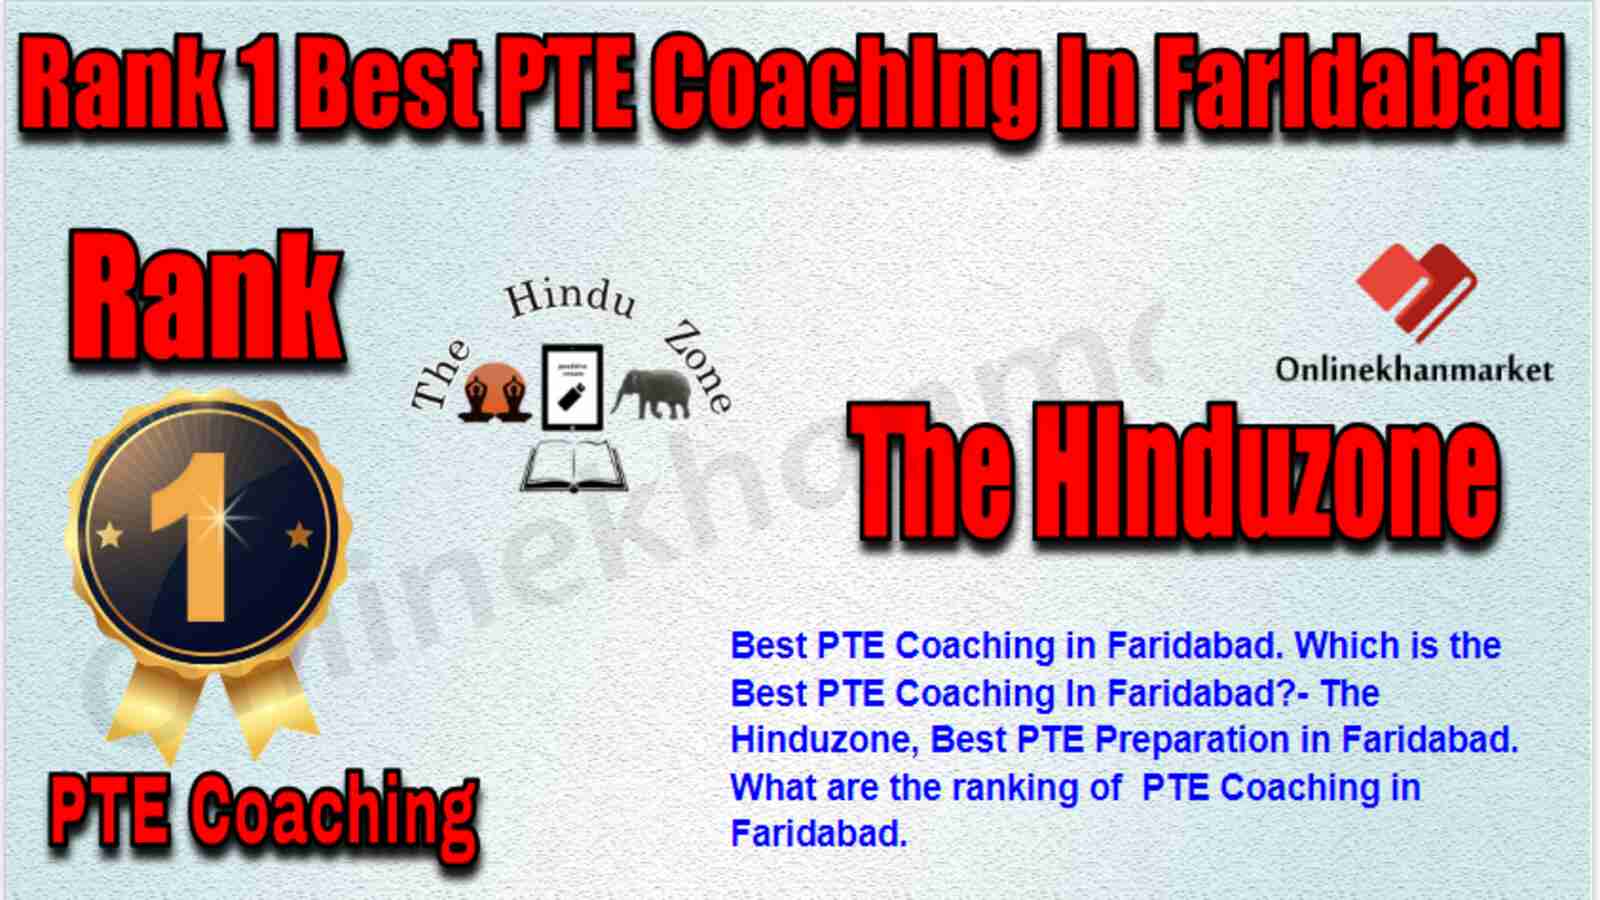 Rank 1 Best PTE Coaching in Faridabad